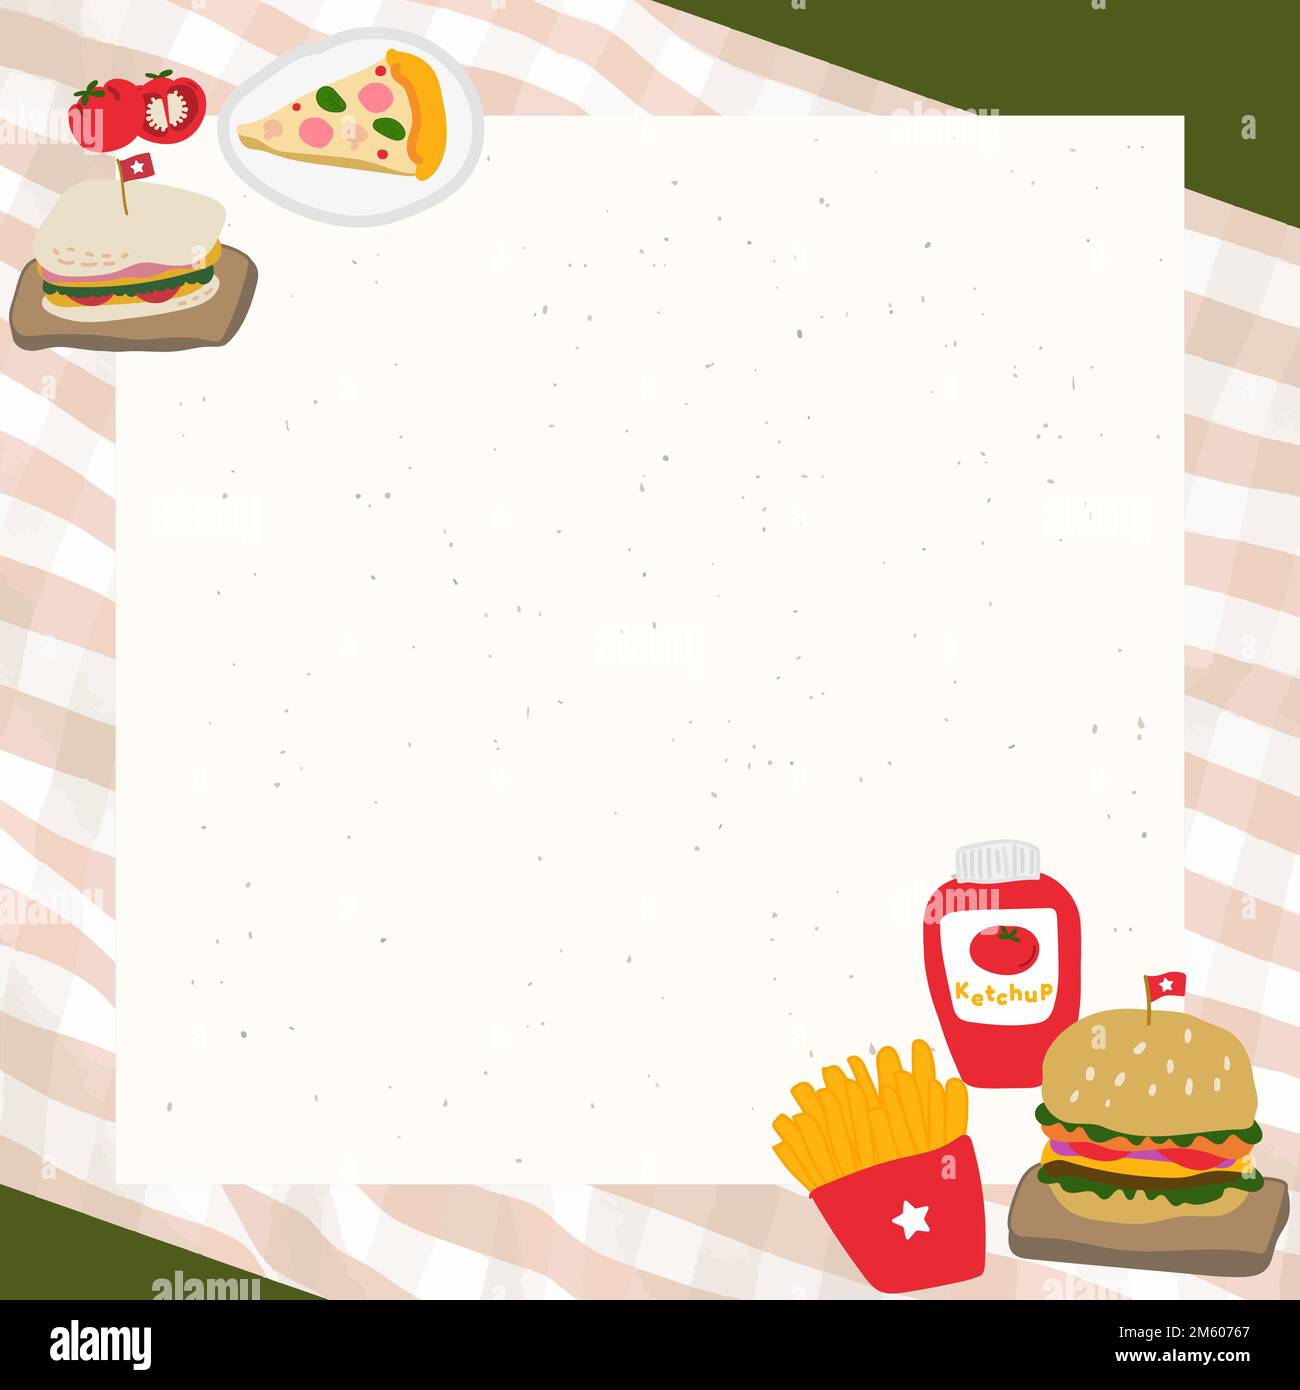 Food doodle frame with a beige background vector Stock Vector Image ...